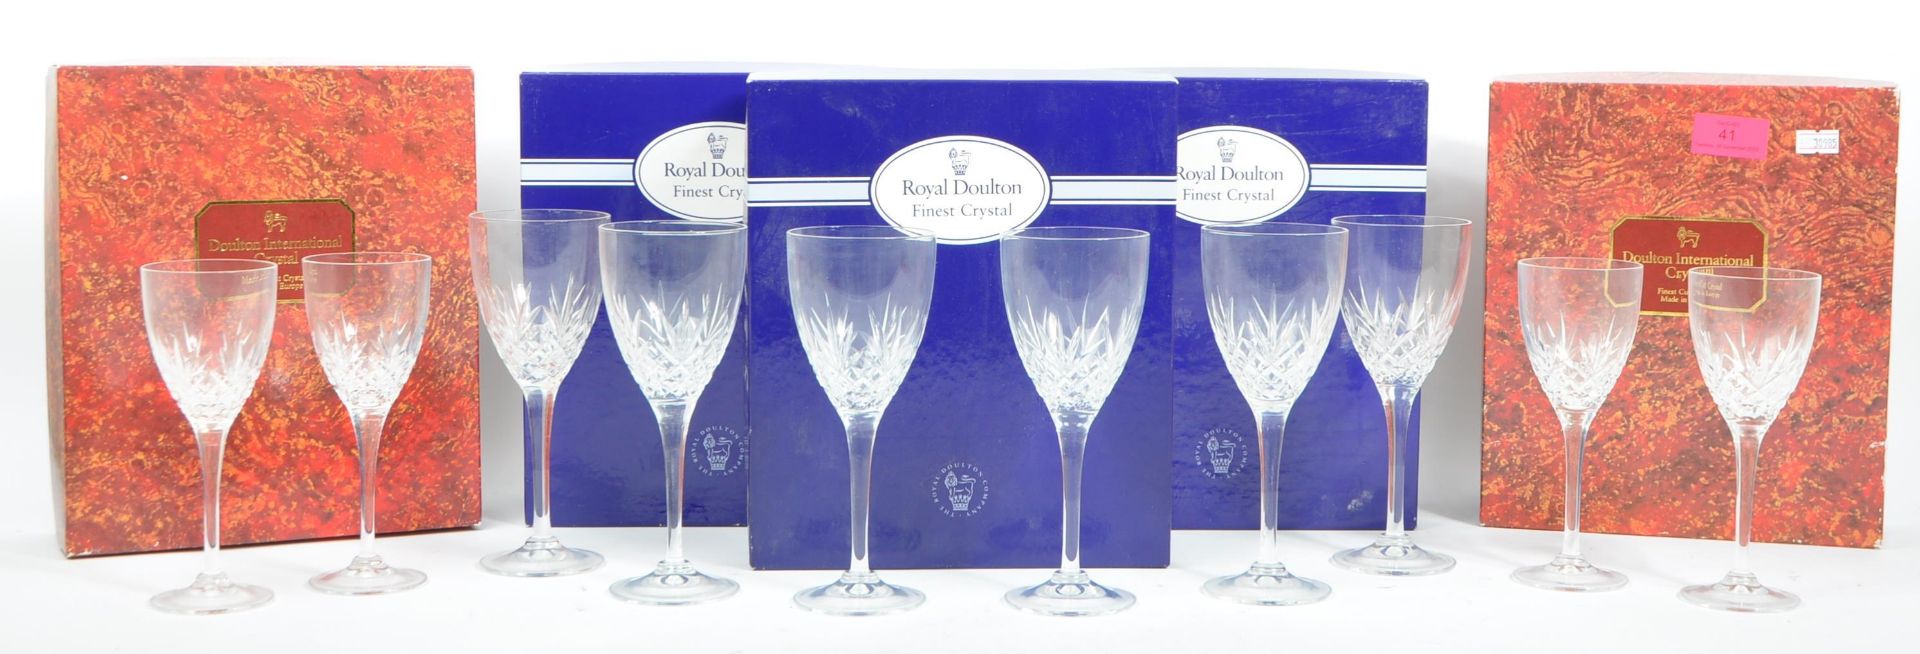 COLLECTION OF ROYAL DOULTON CRYSTAL DRINKING GLASS SETS